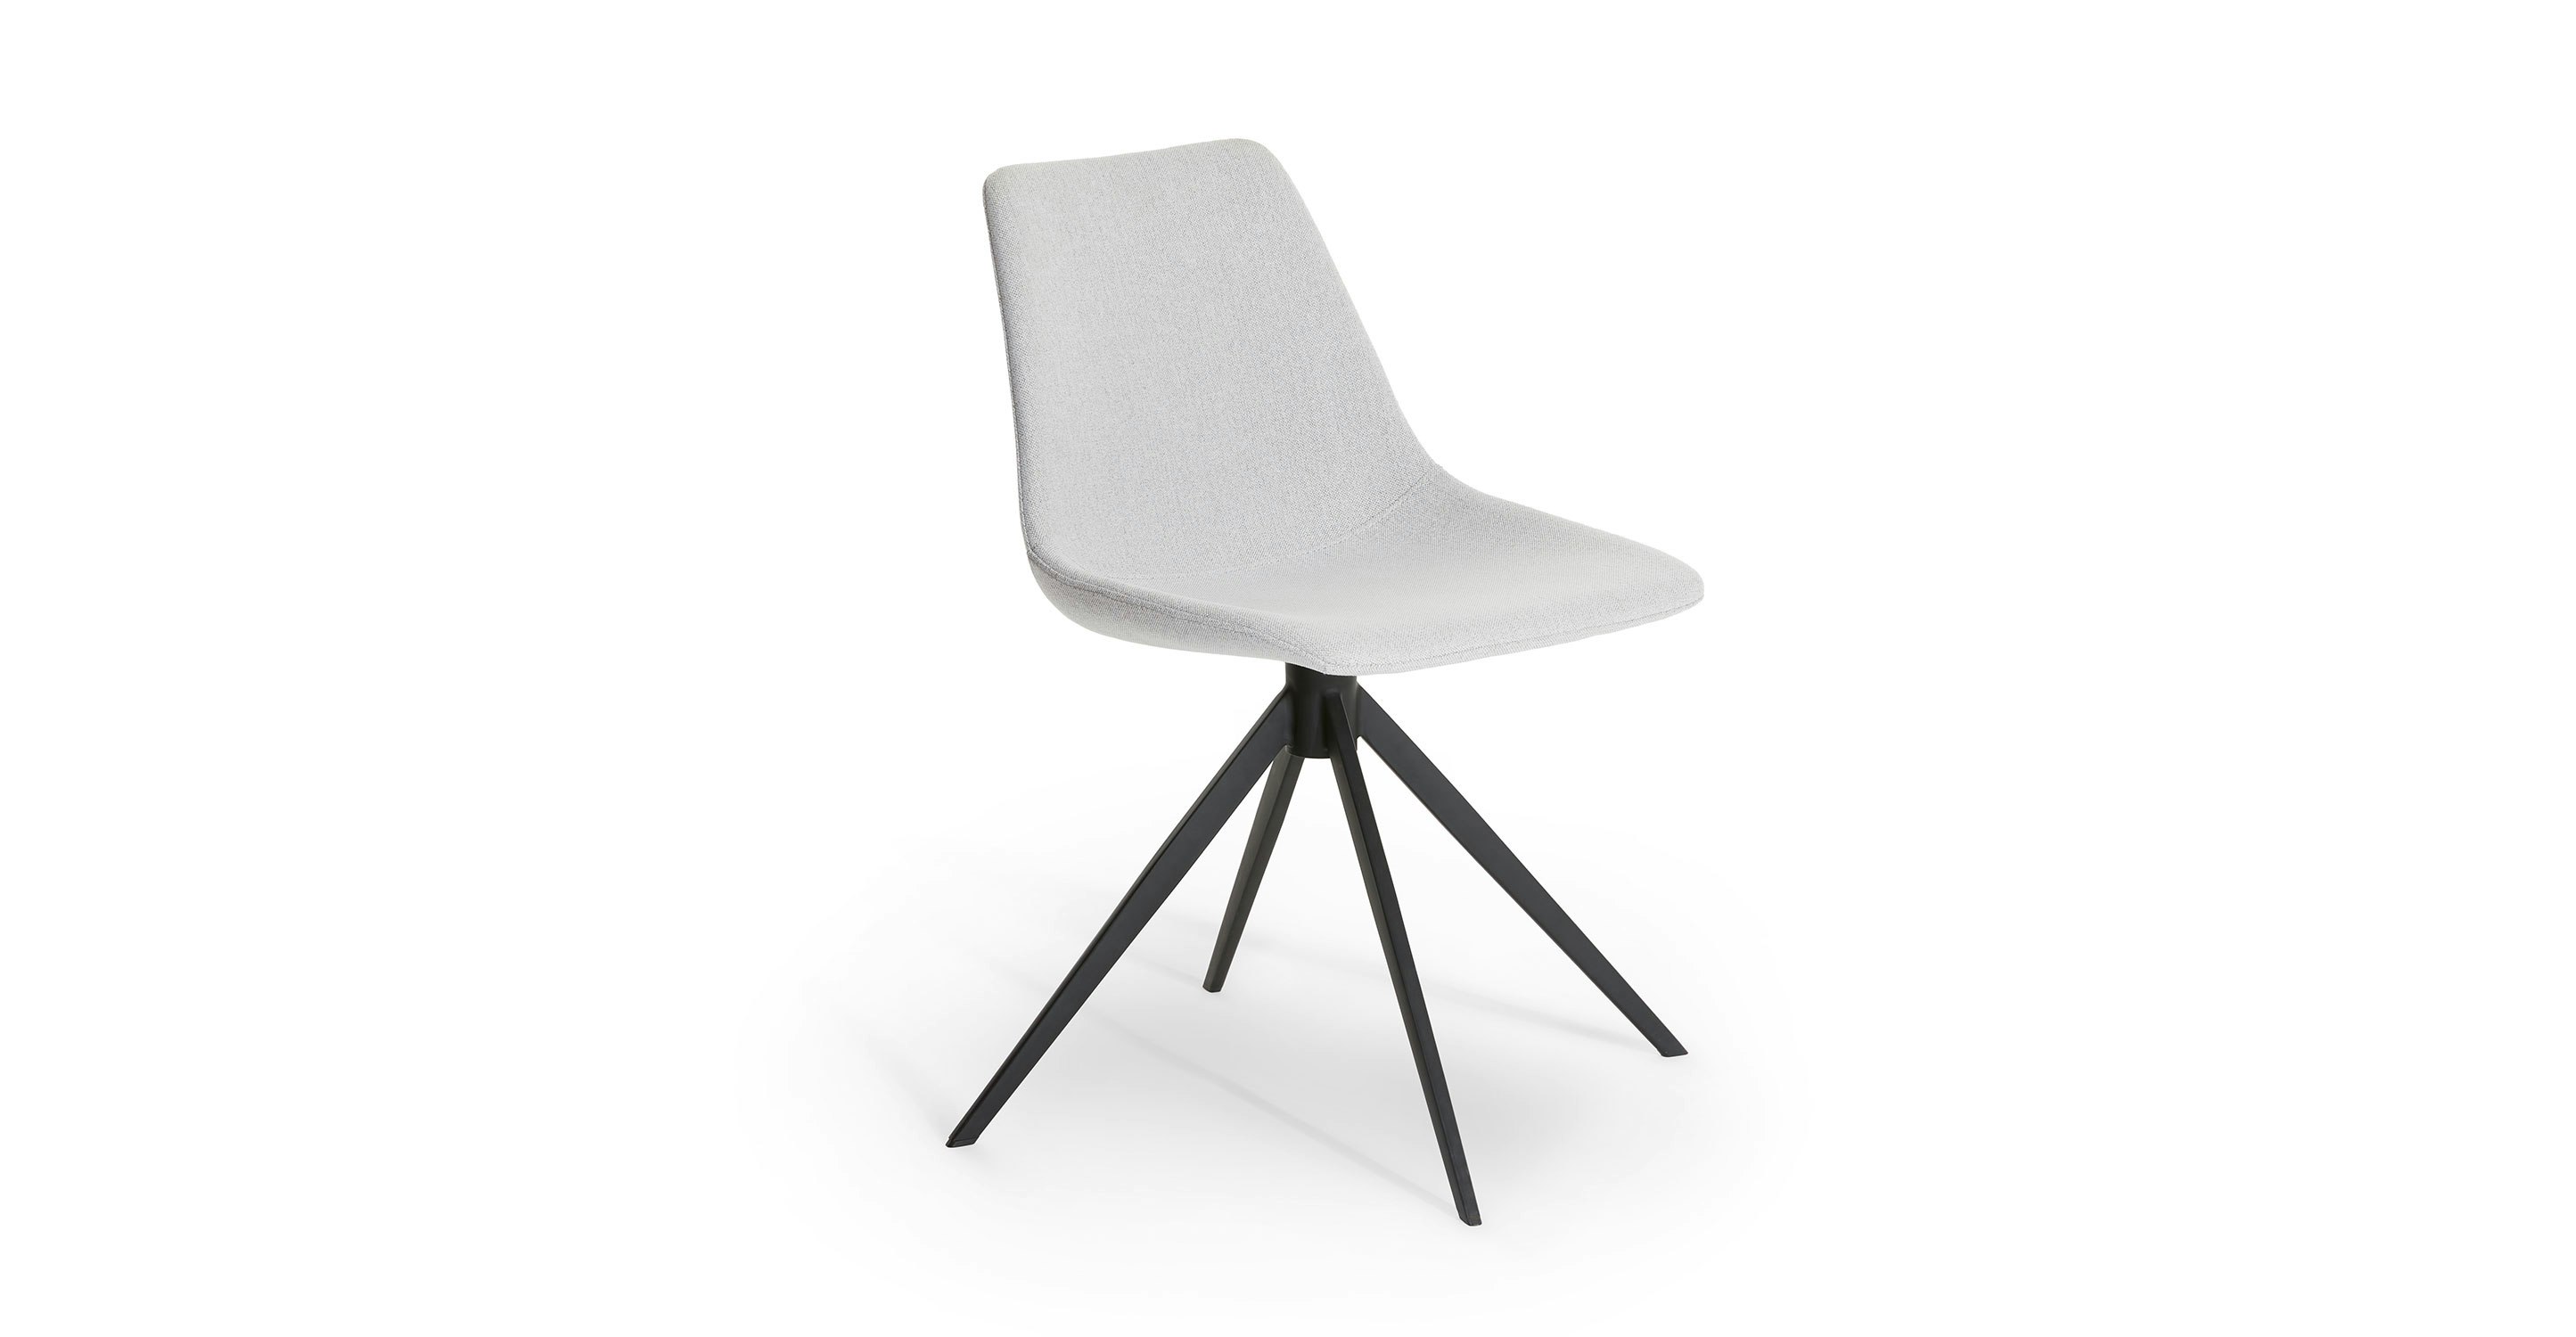 Drizzle Gray Wilsta Fabric Swivel Dining Chair | Article